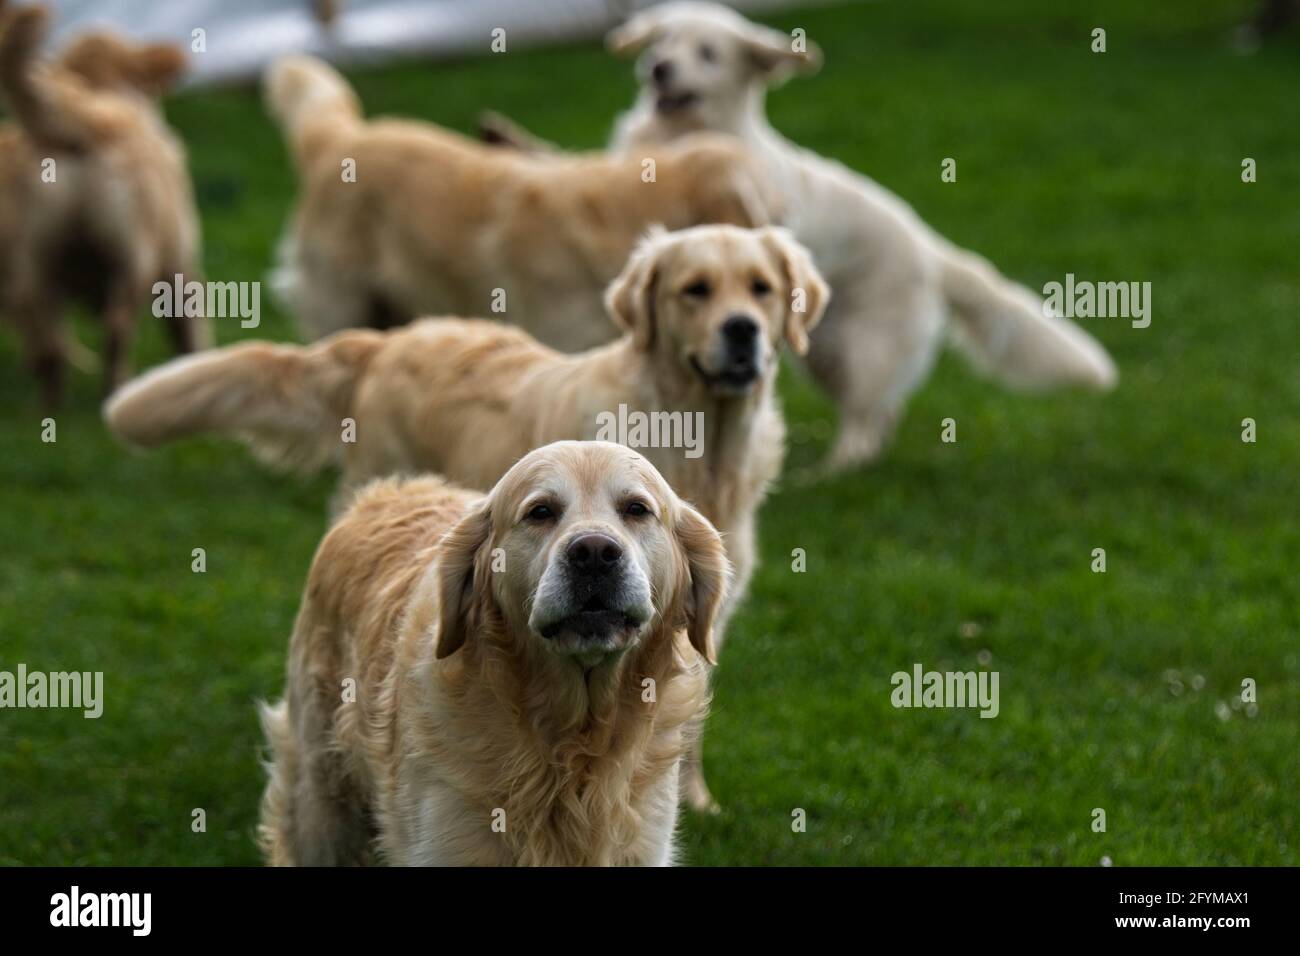 Golden retrievers playing outside in their natural environment on grass chasing bubbles. Stock Photo